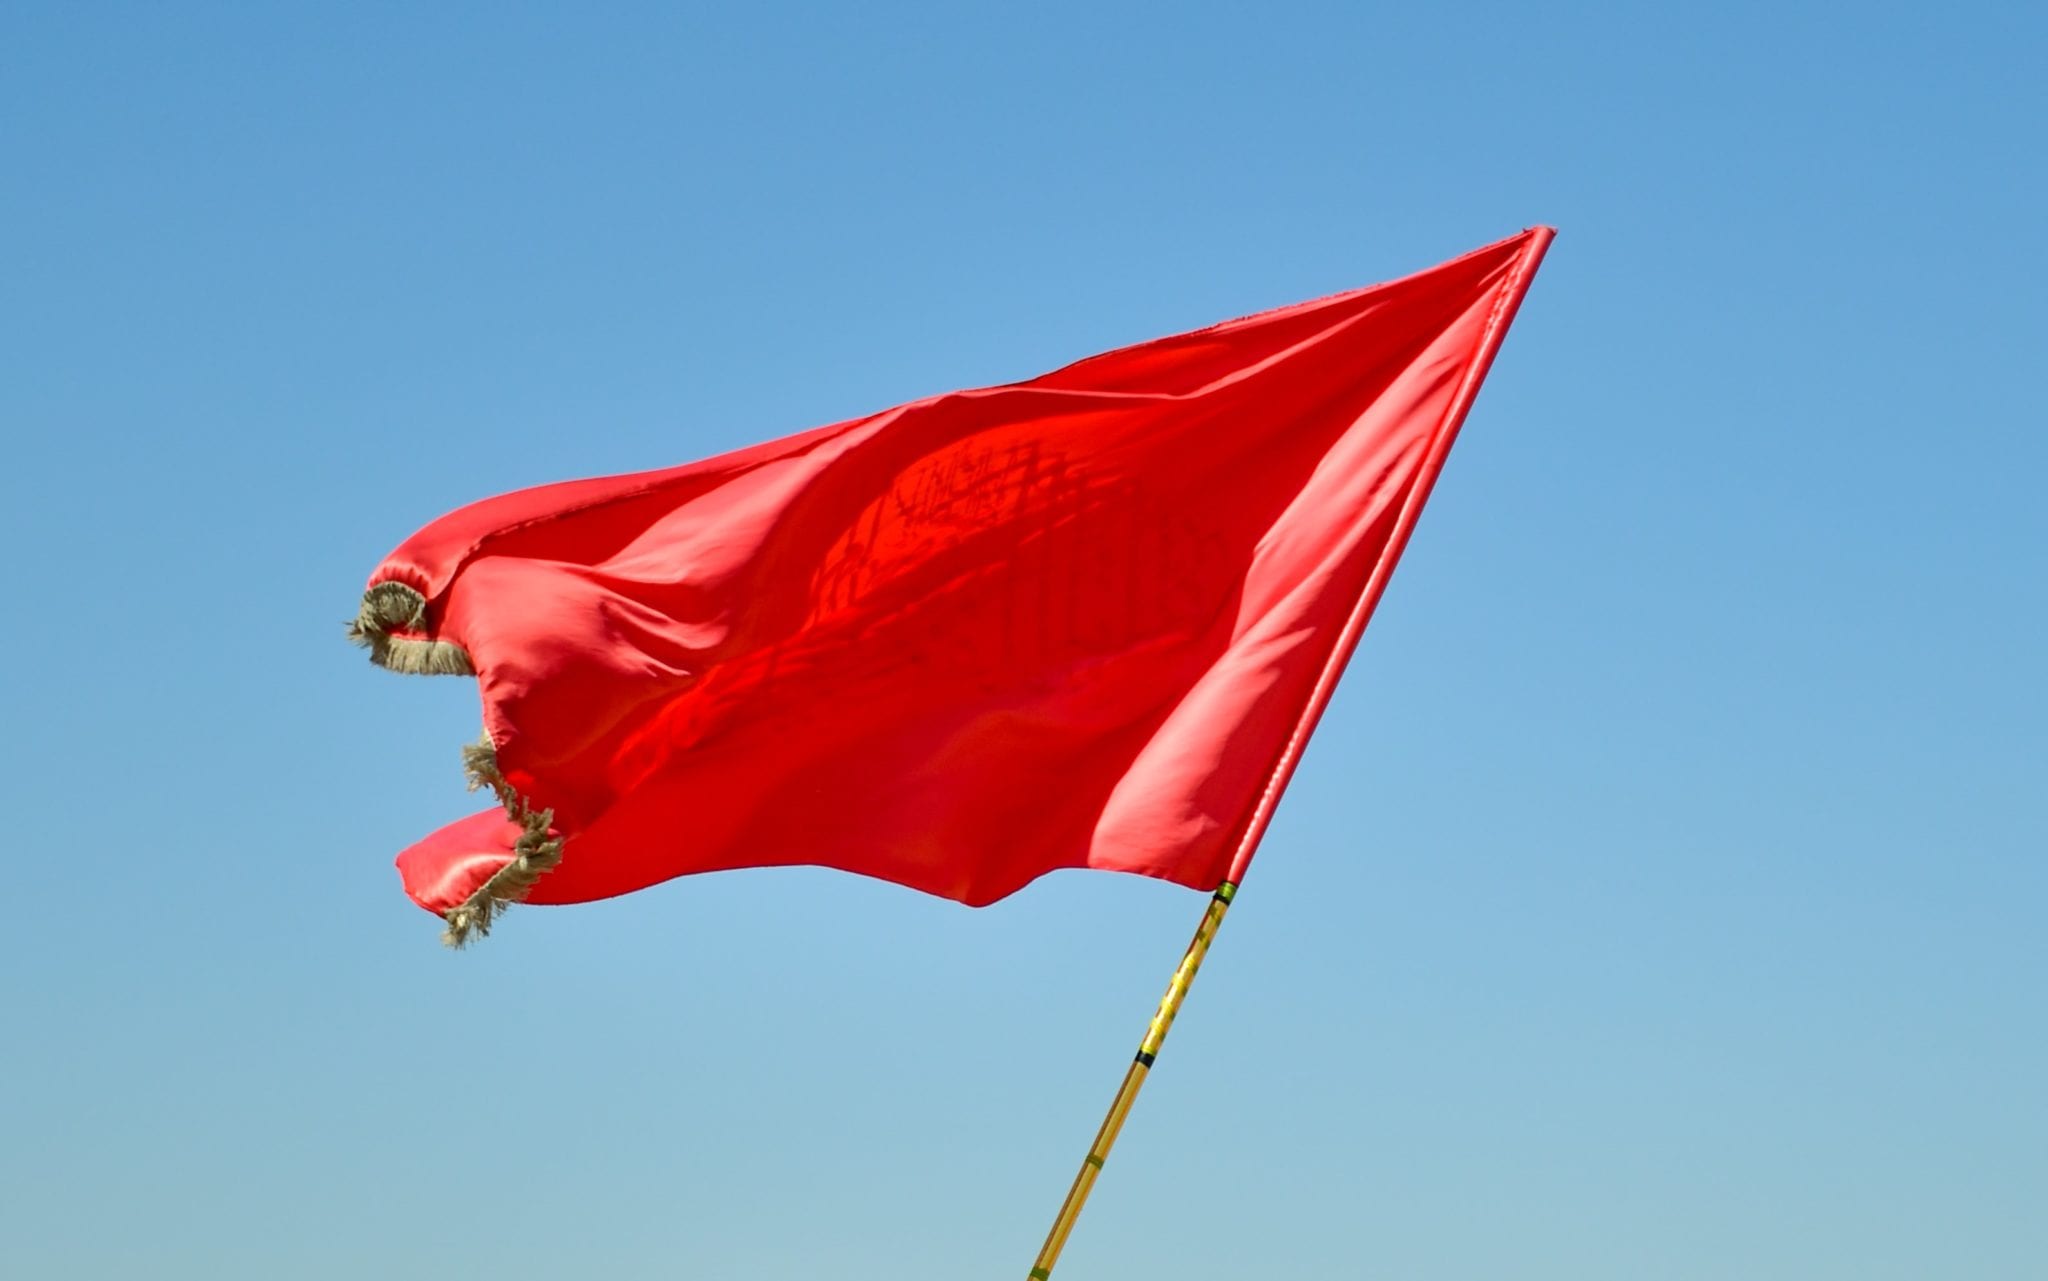 Red flag waving in the blue sky